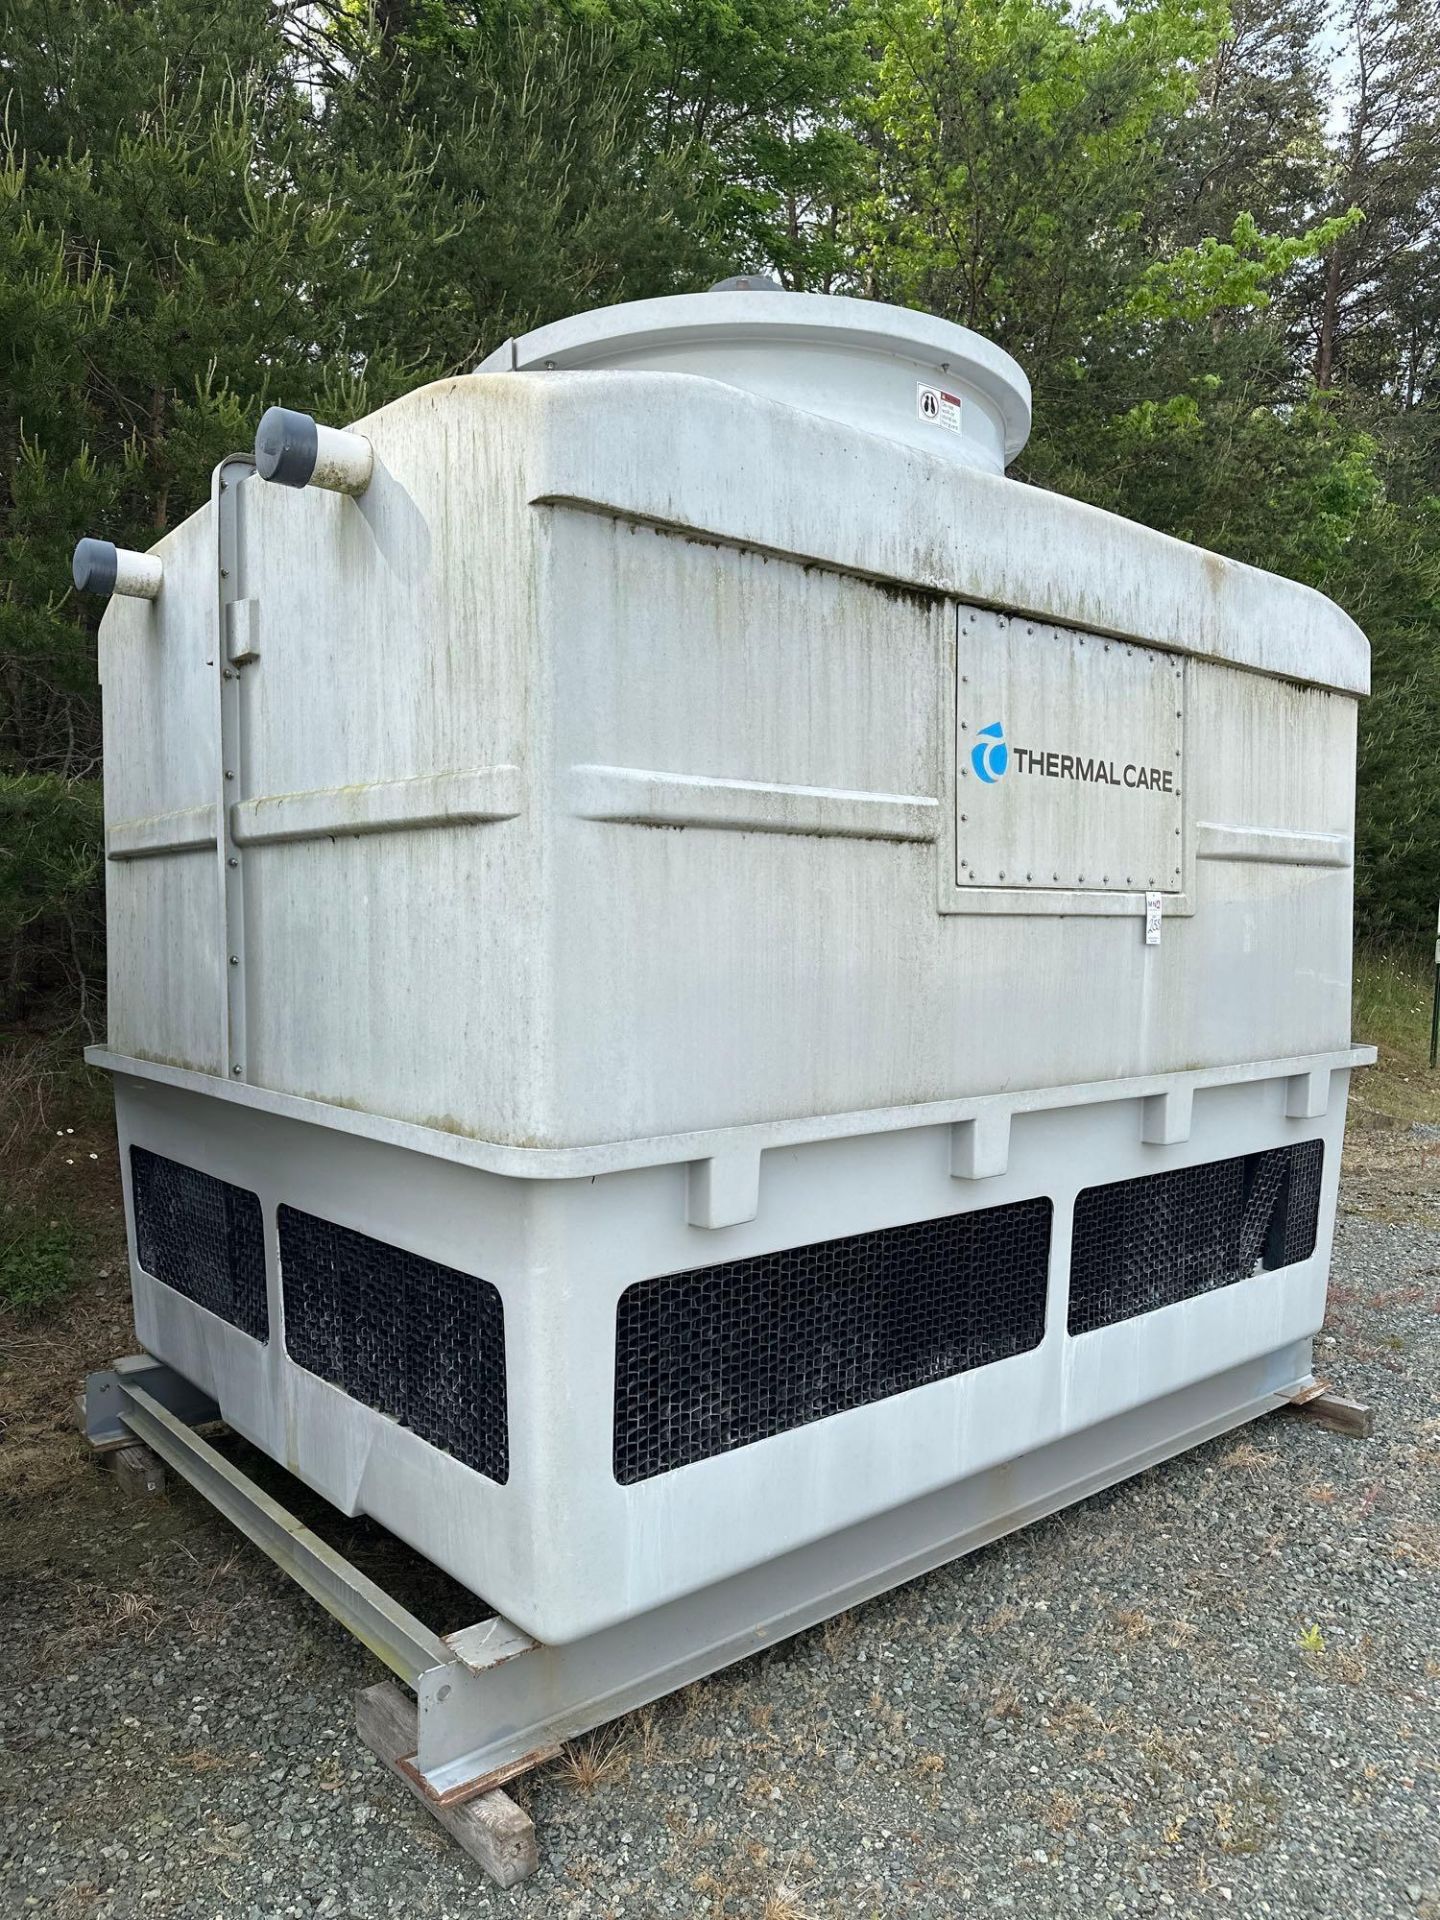 170 Ton Thermal Care Cooling Tower - Image 3 of 5